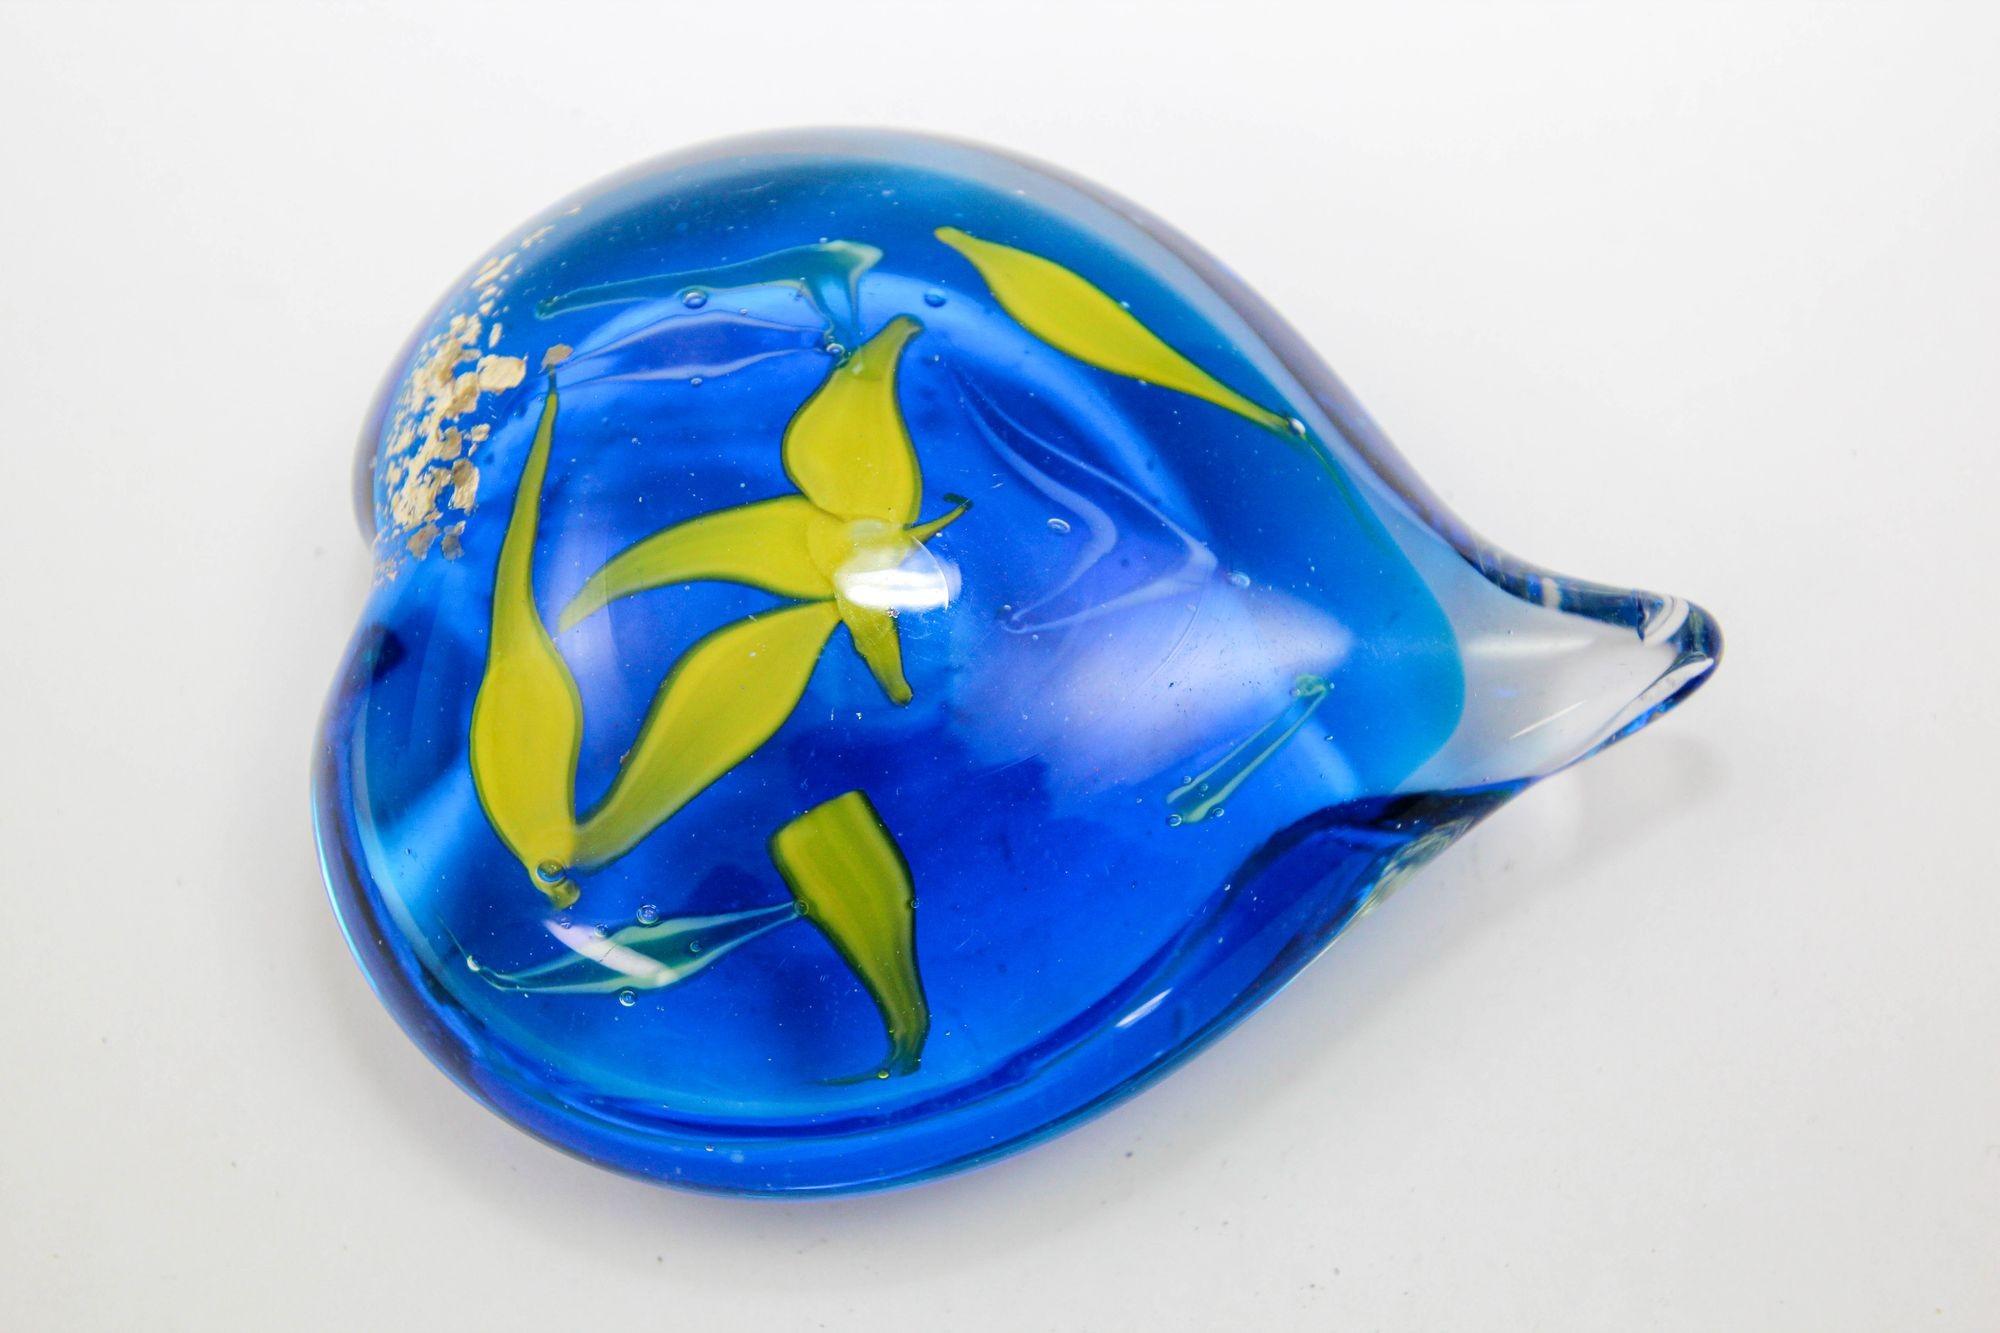 Murano Vintage Yellow Heart Glass With Bubbles Paperweight Desk Accessory.
Beautiful Murano Art Glass Cobalt Blue and Yellow Heart Shaped Paperweight in Cobalt Blue with Yellow and MurineThis gorgeous and happy vintage Italian Mid-Century Modern